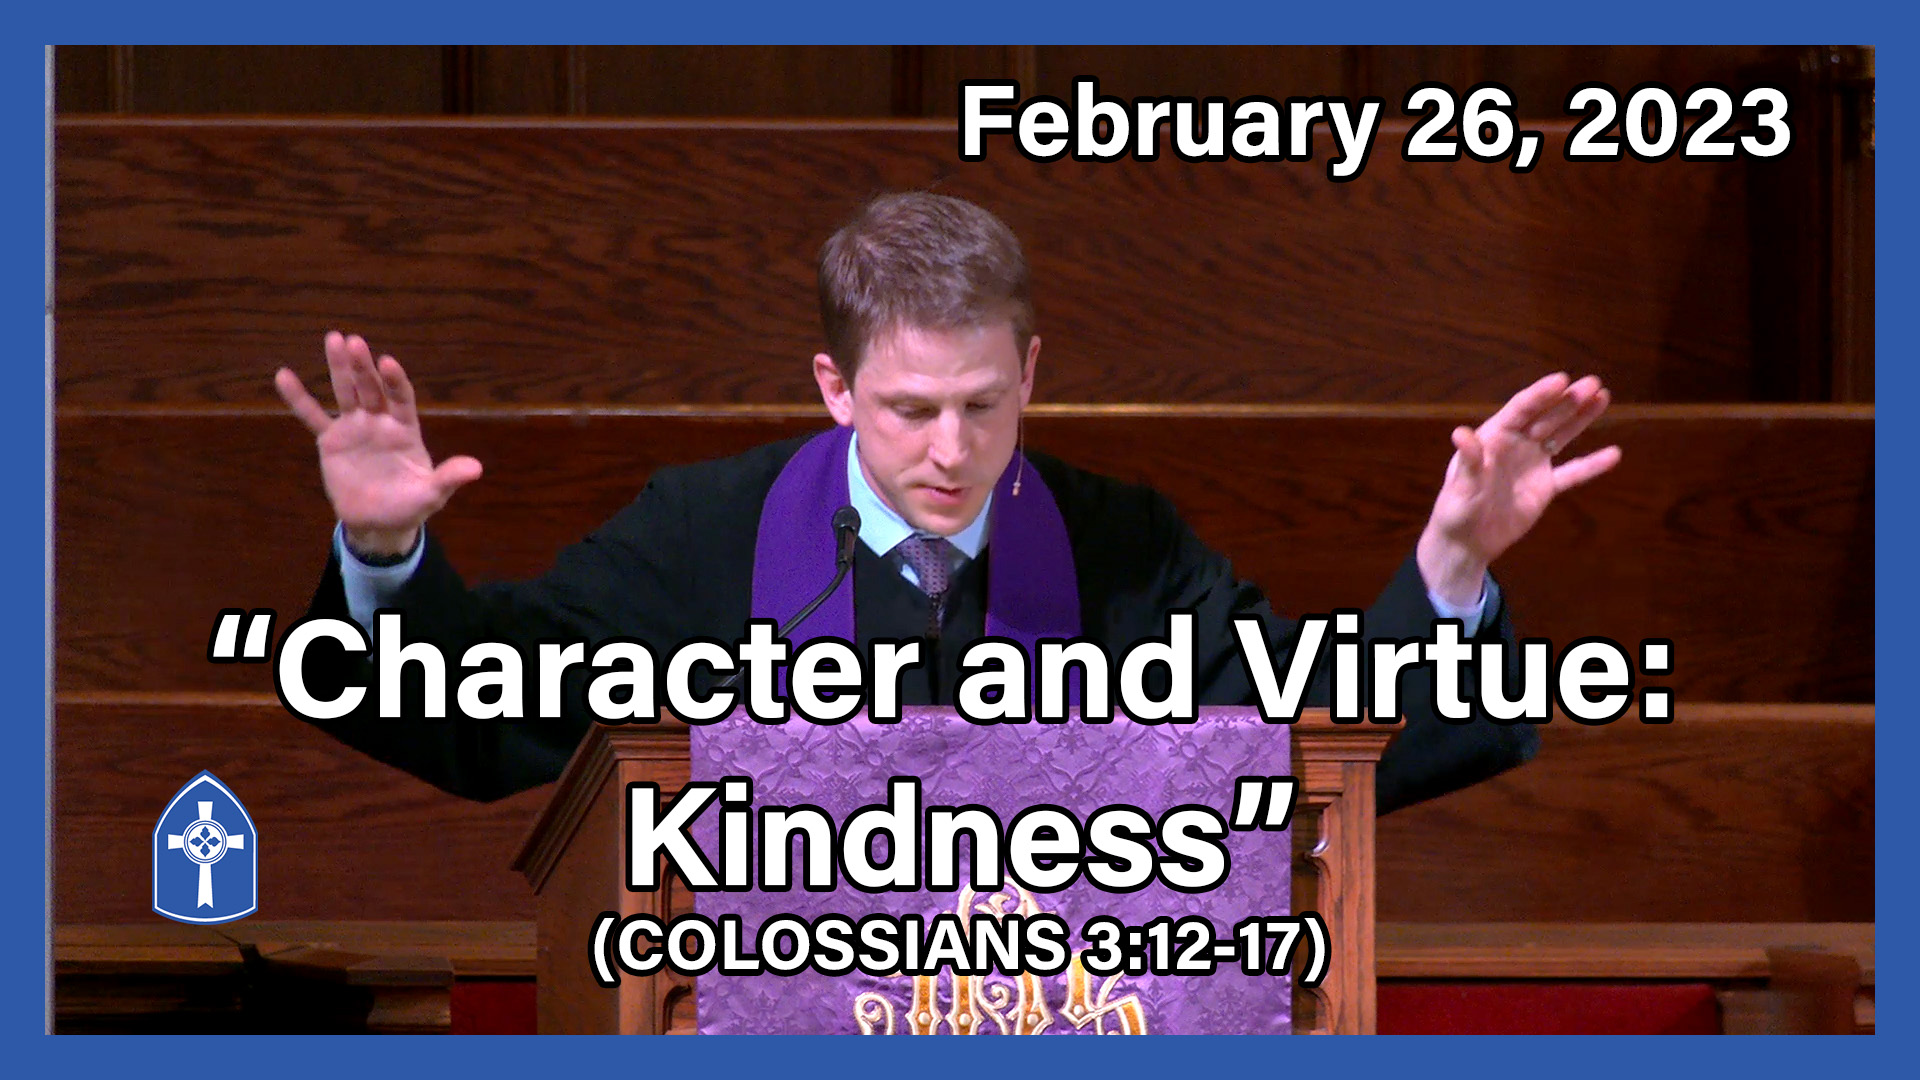 February 26 - Character and Virtue: Kindness